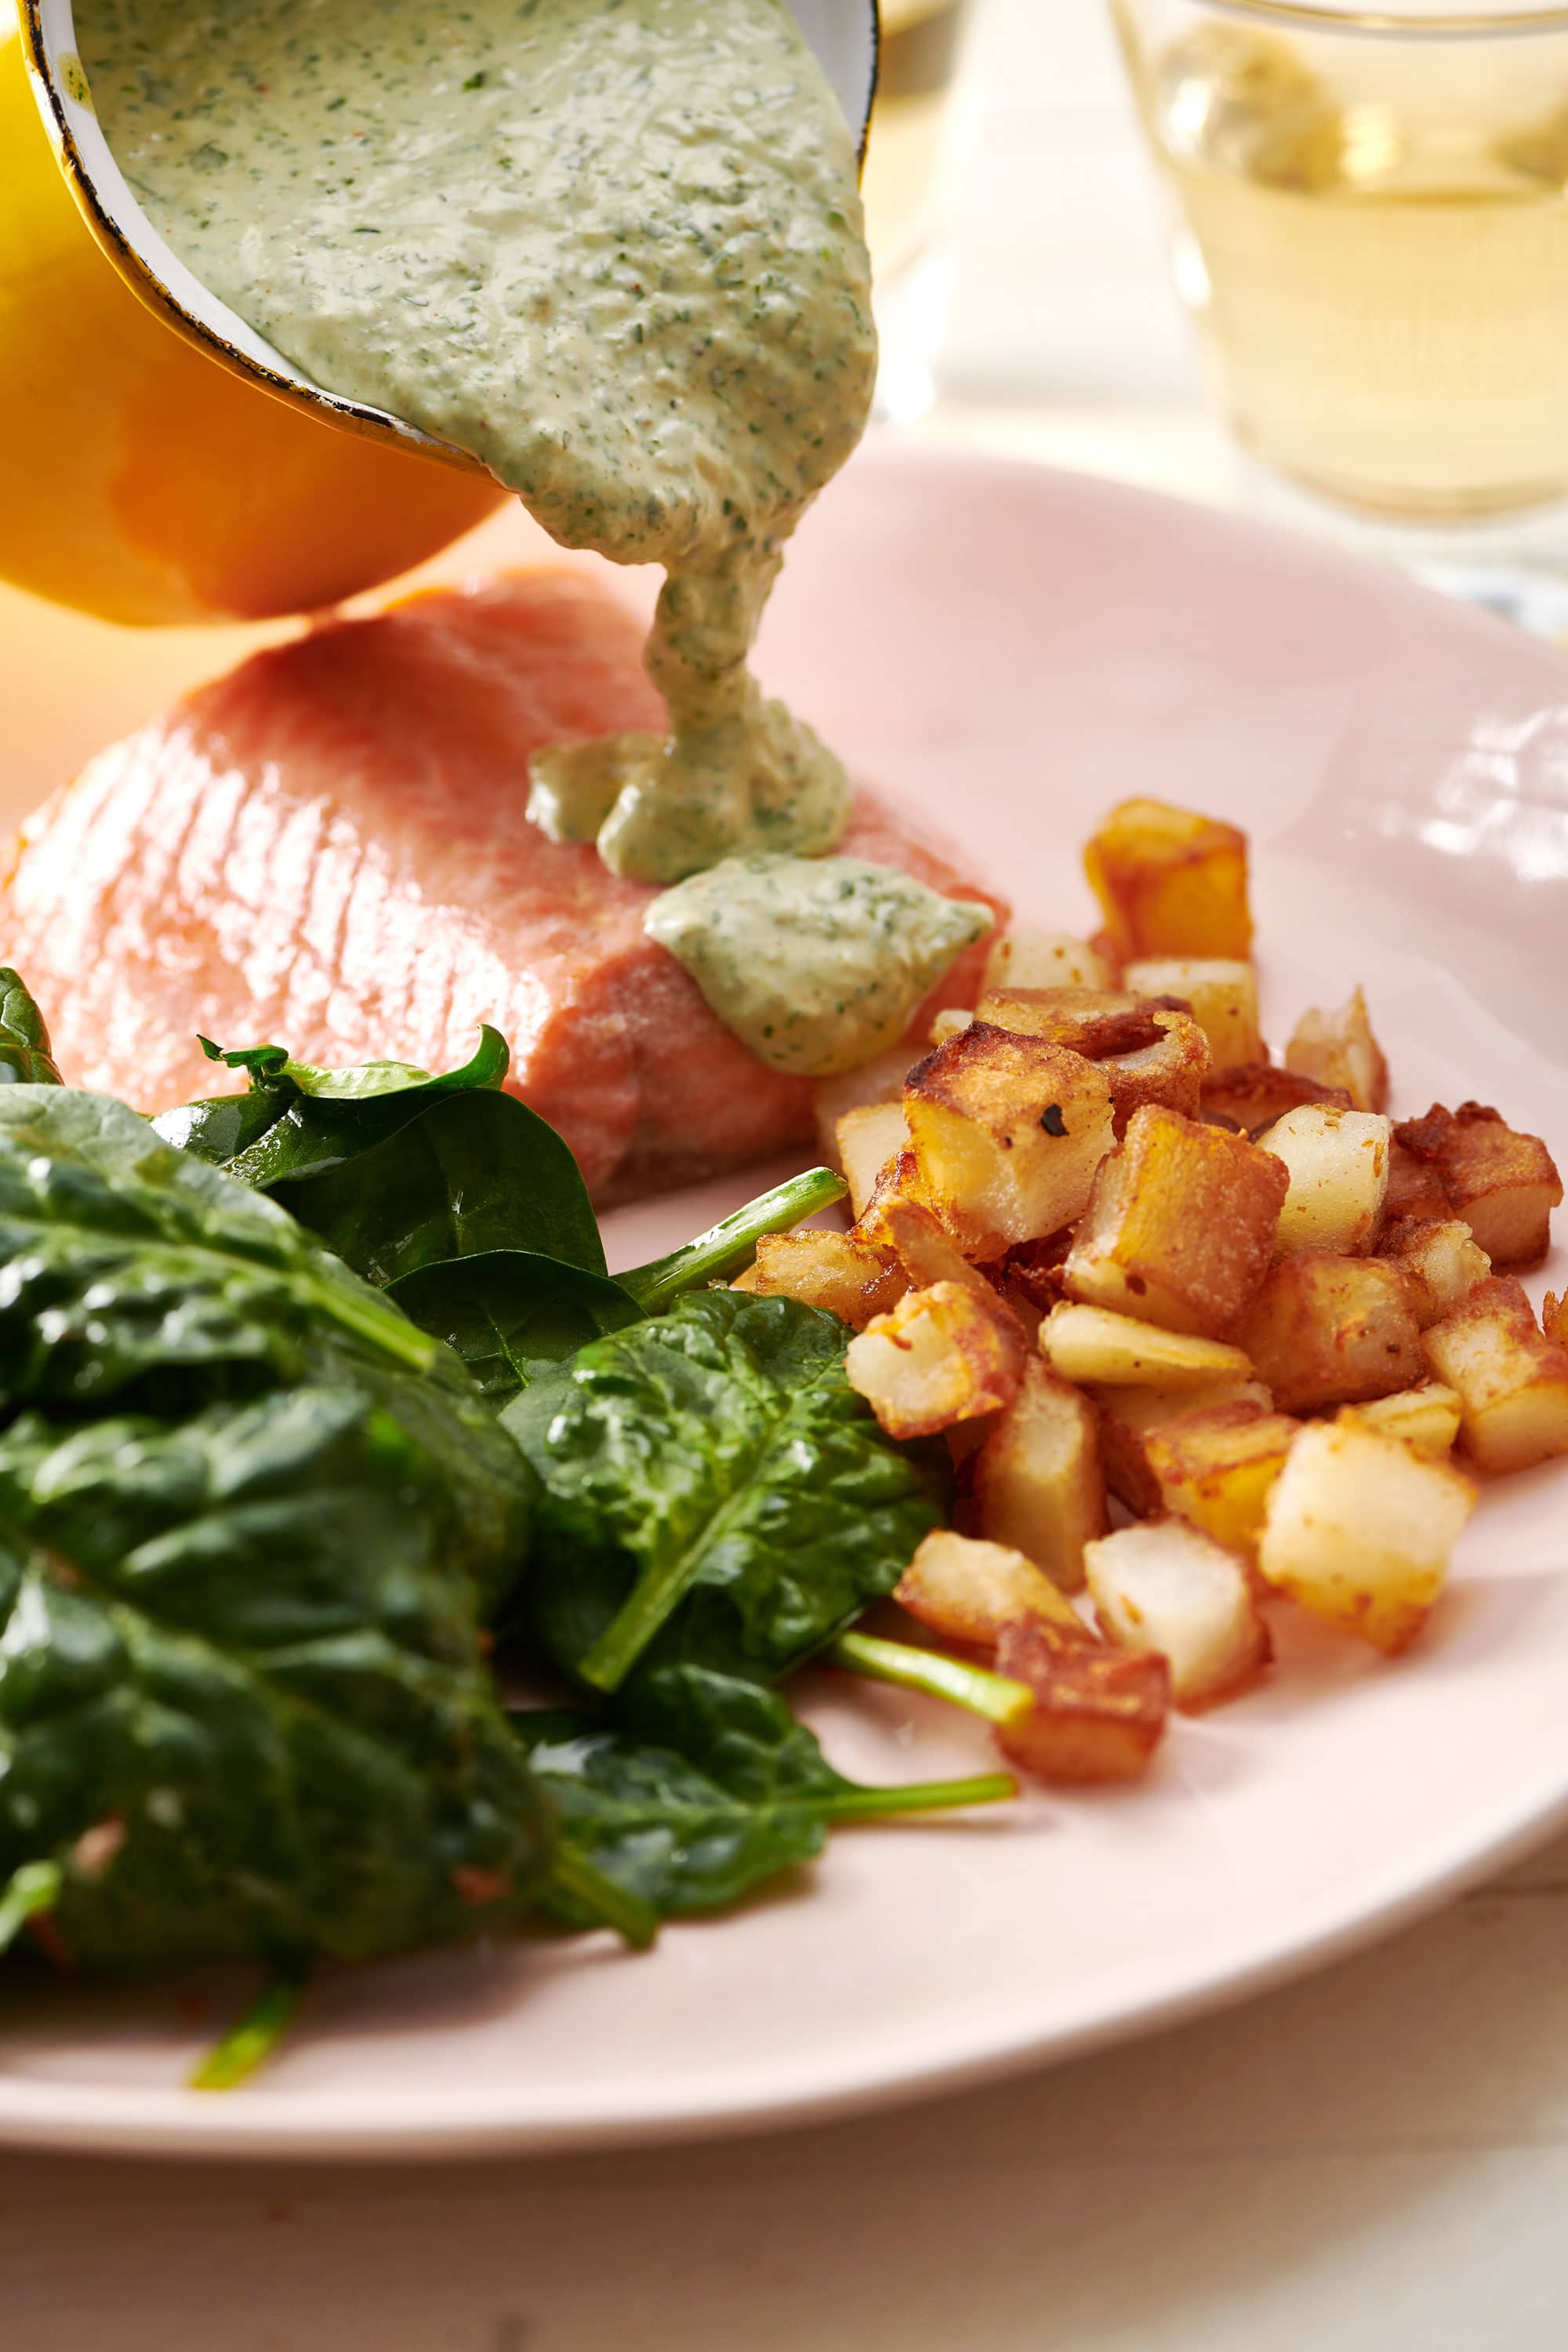 Pouring cilantro sauce over poached salmon with sides.